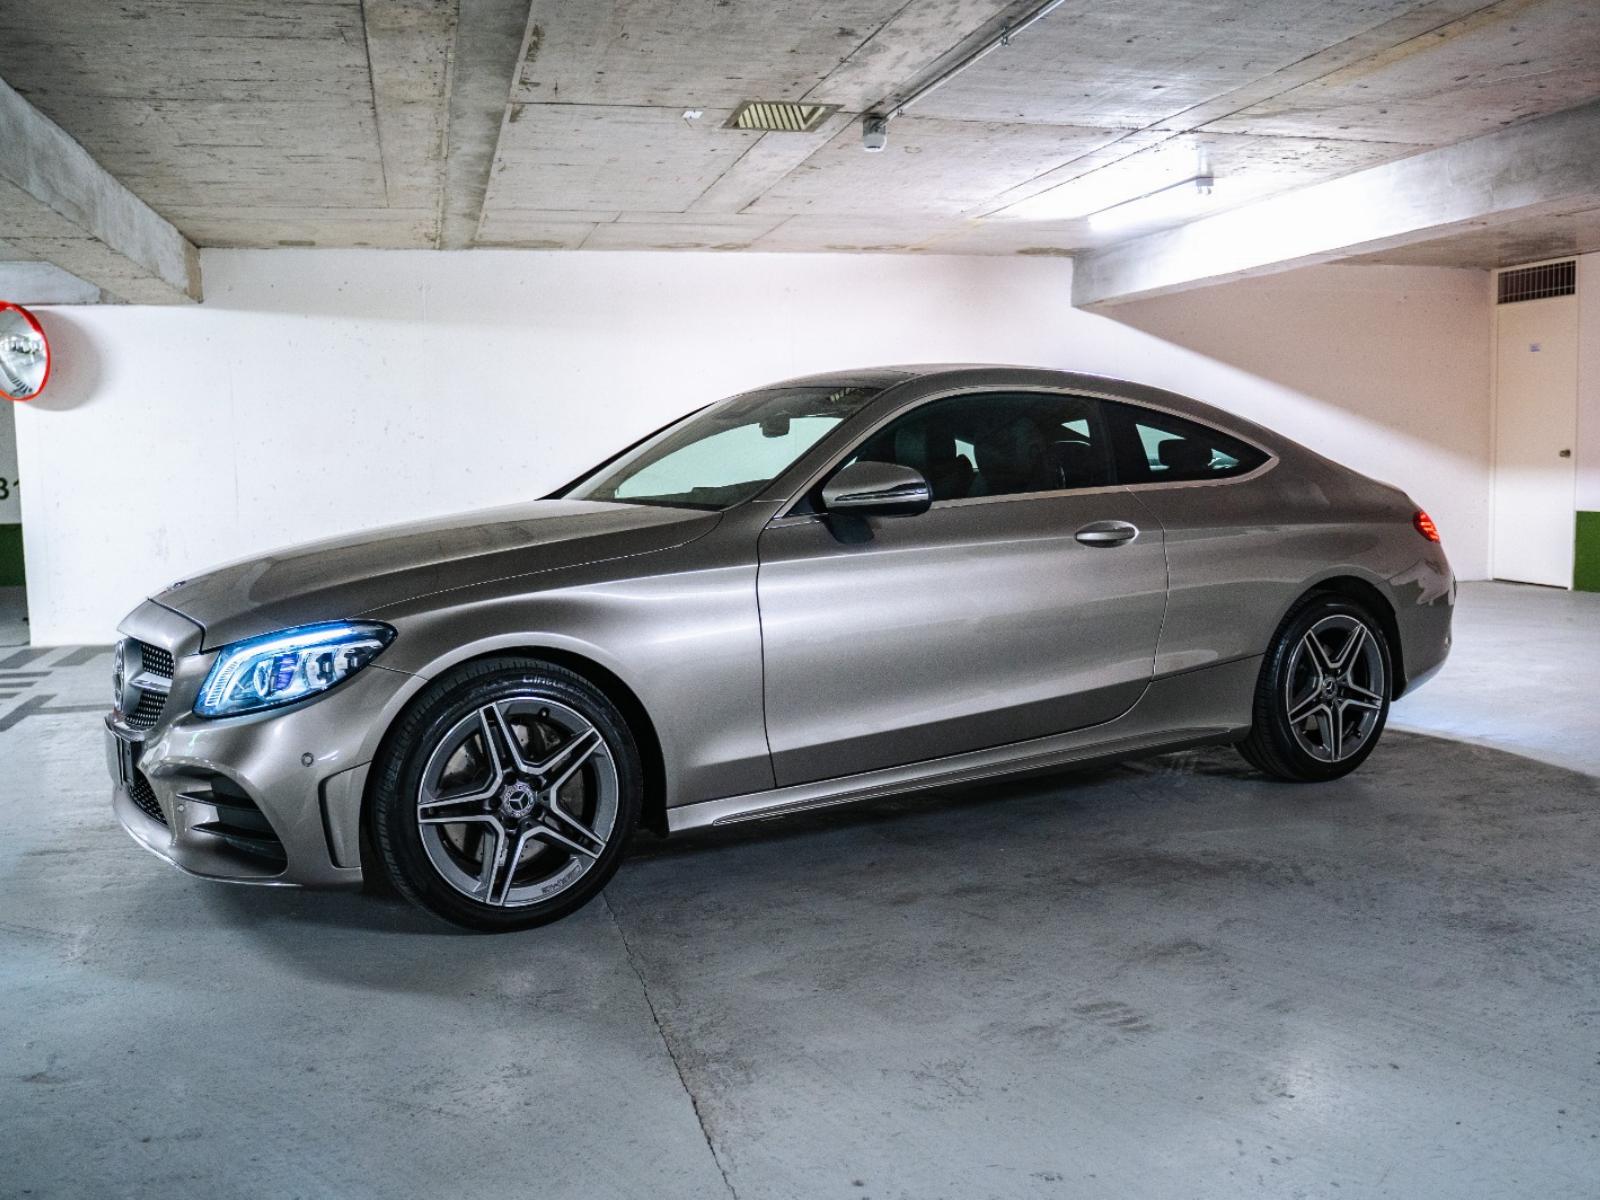 MERCEDES-BENZ C300 COUPE 2020 2.0 LTS - 258 HP - FULL MOTOR